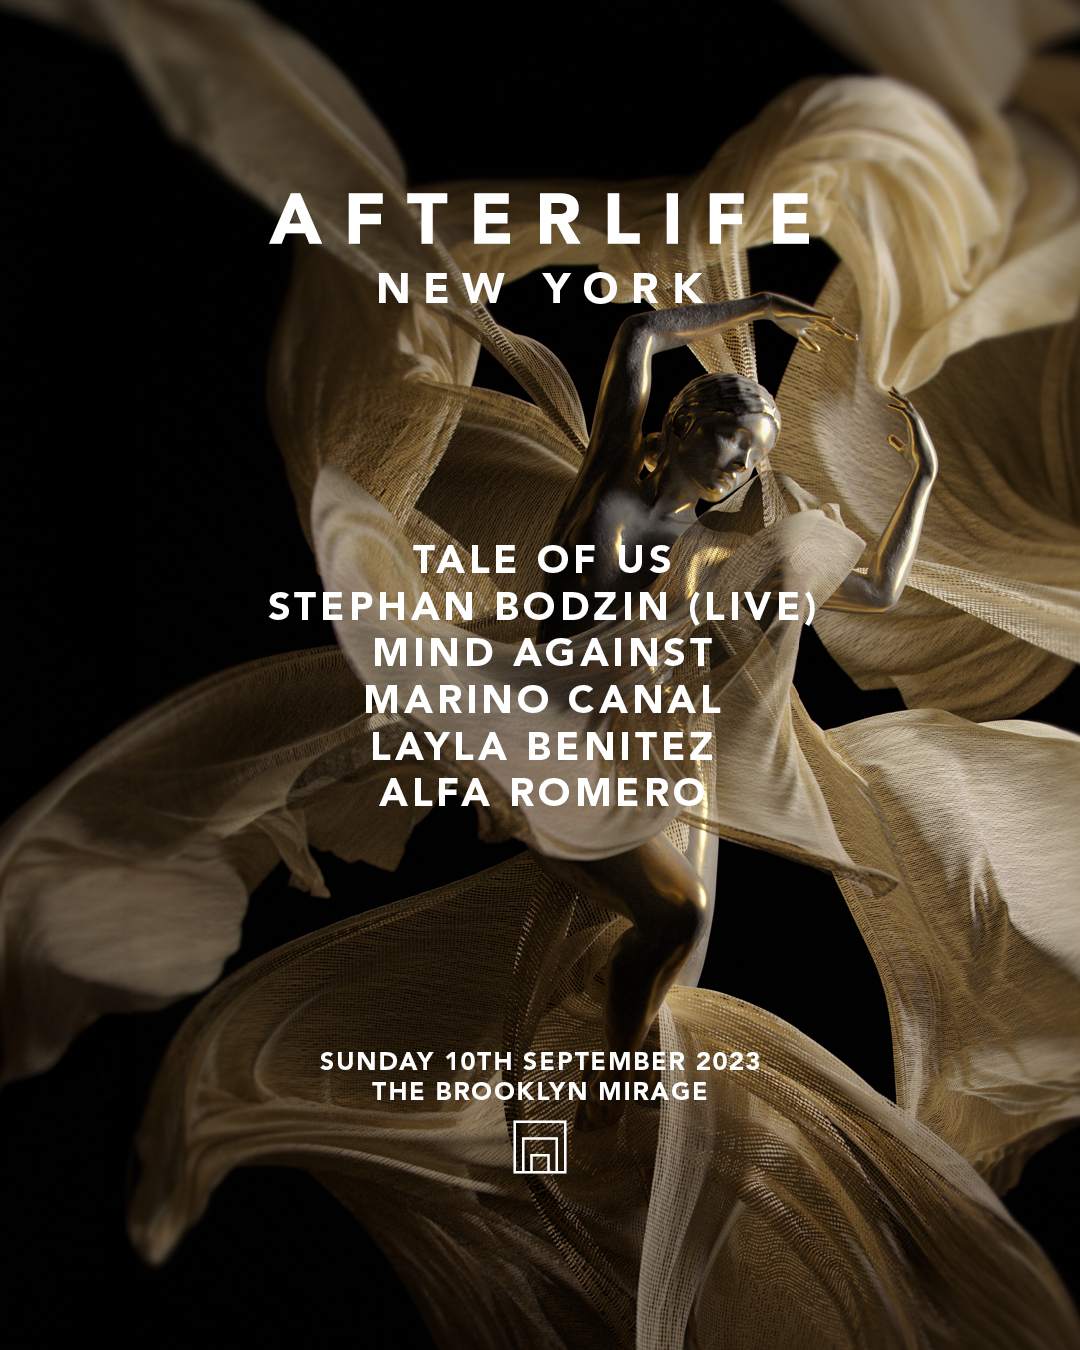 Tale Of Us @ Afterlife Los Angeles, United States 2023-10-13